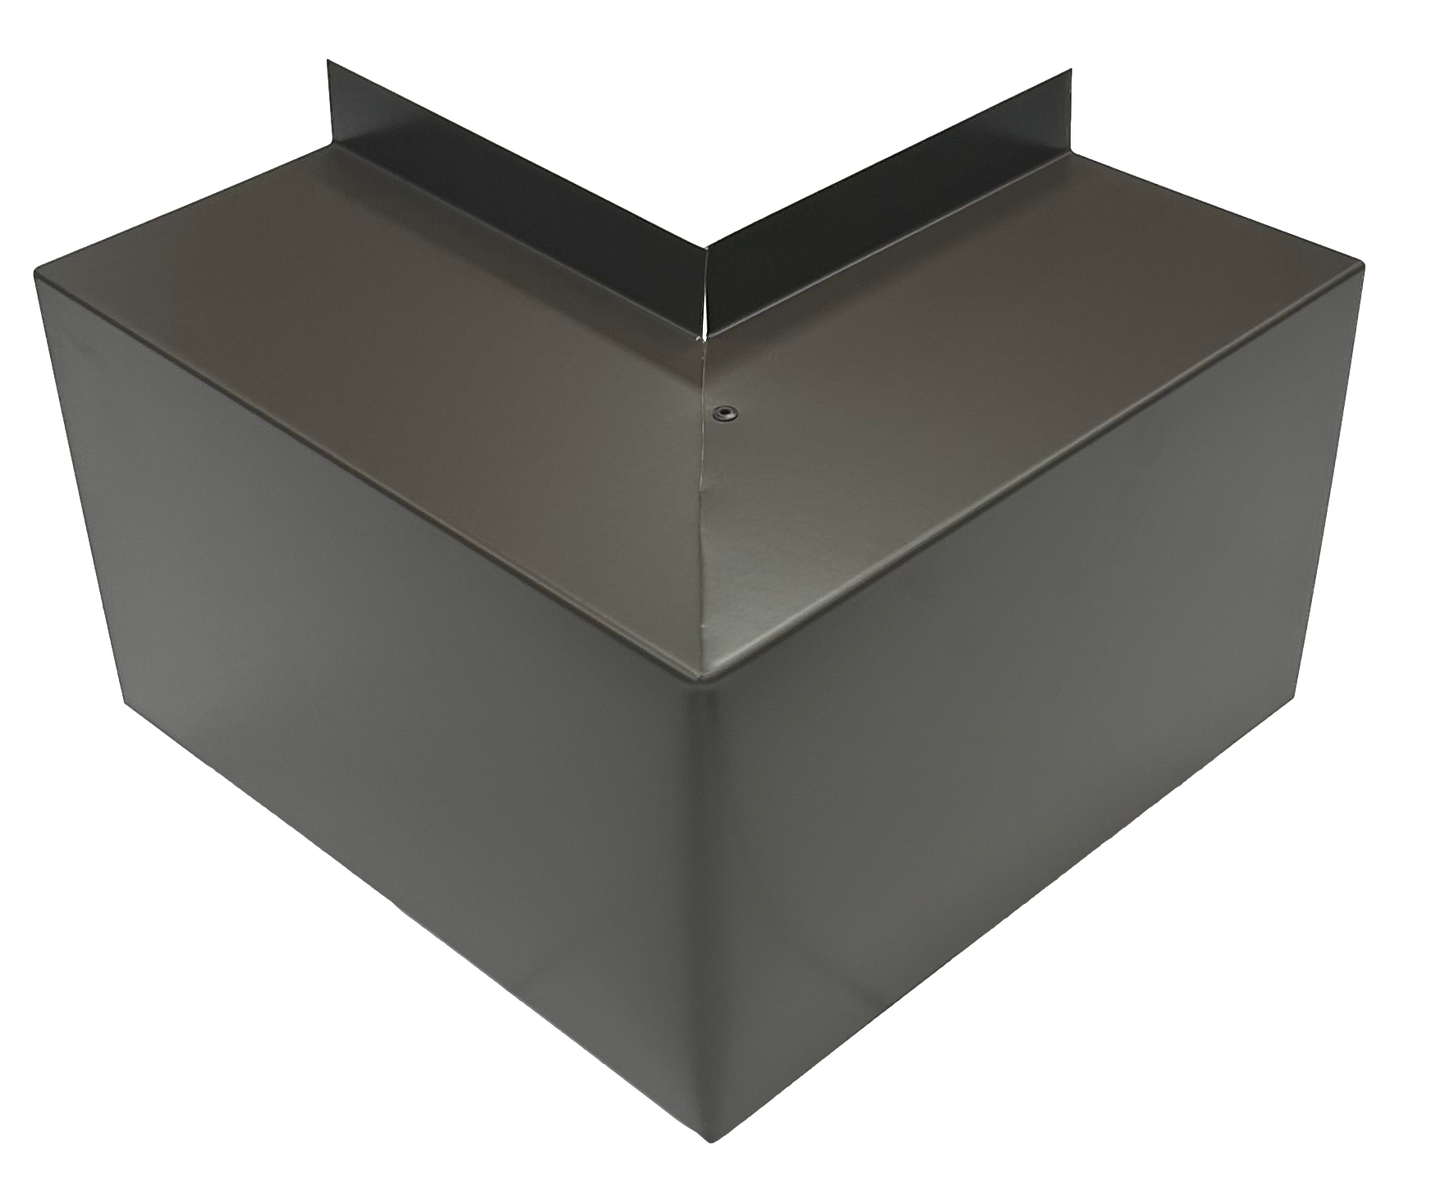 A sleek, metallic, L-shaped object with smooth surfaces and sharp edges. It appears to be a Perma Cover Residential Series - Line Set Cover Outside Corner Elbows - Premium Quality, possibly used in construction or assembly for providing support and alignment. Simple and easy installation ensures efficiency. The background is black, highlighting its reflective surface.